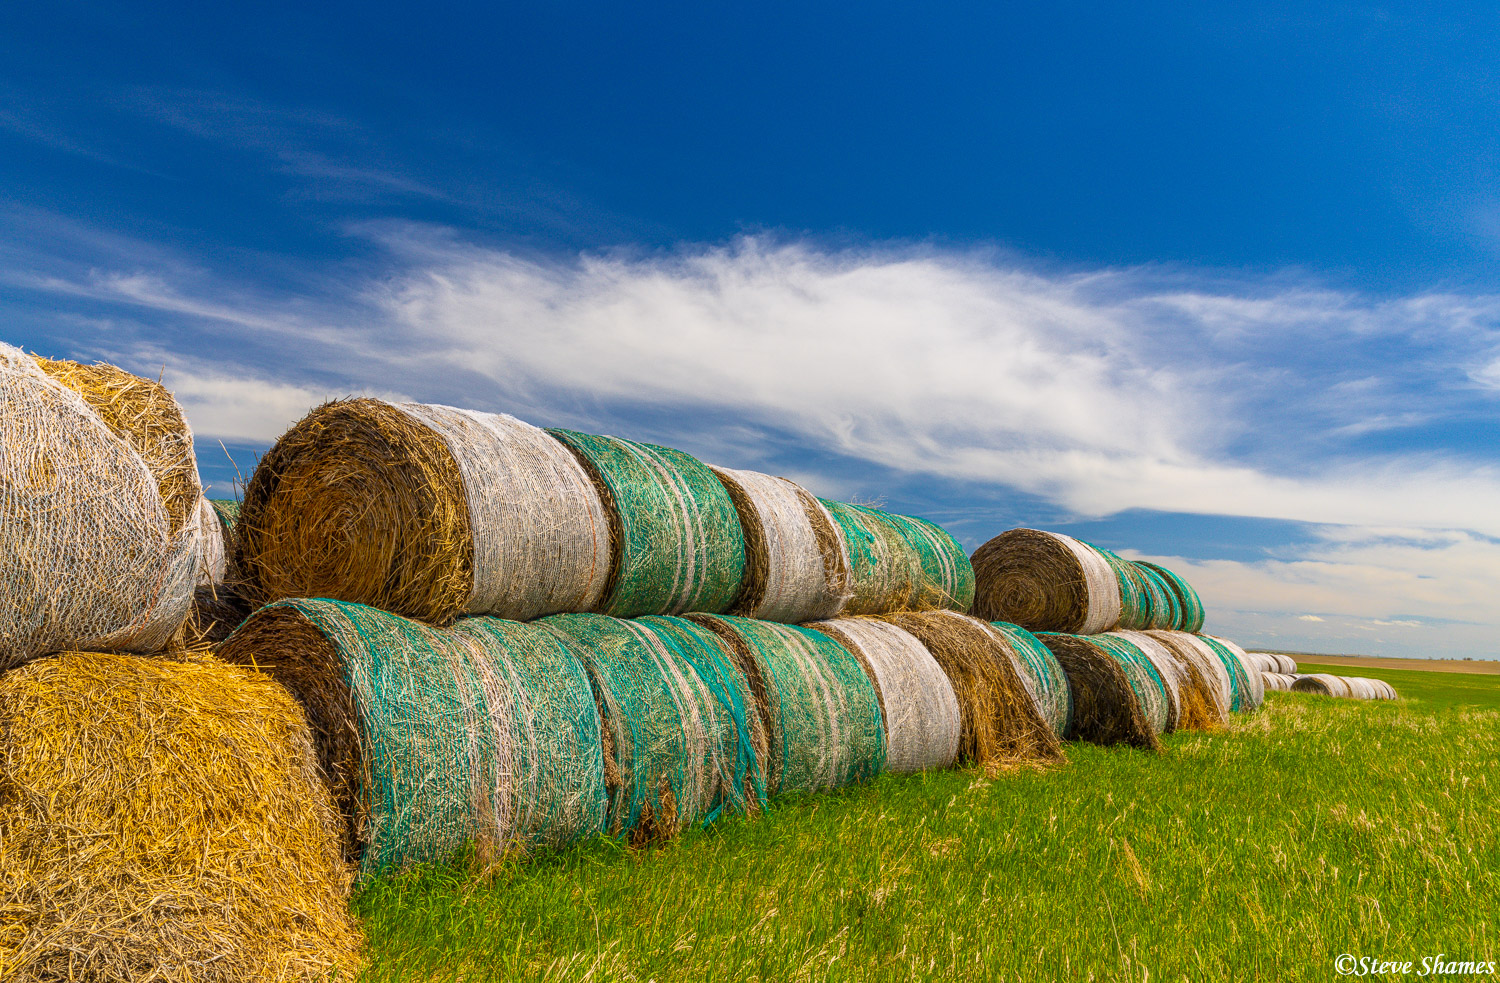 I like these colorful round hay bales -- something you don't see in California.